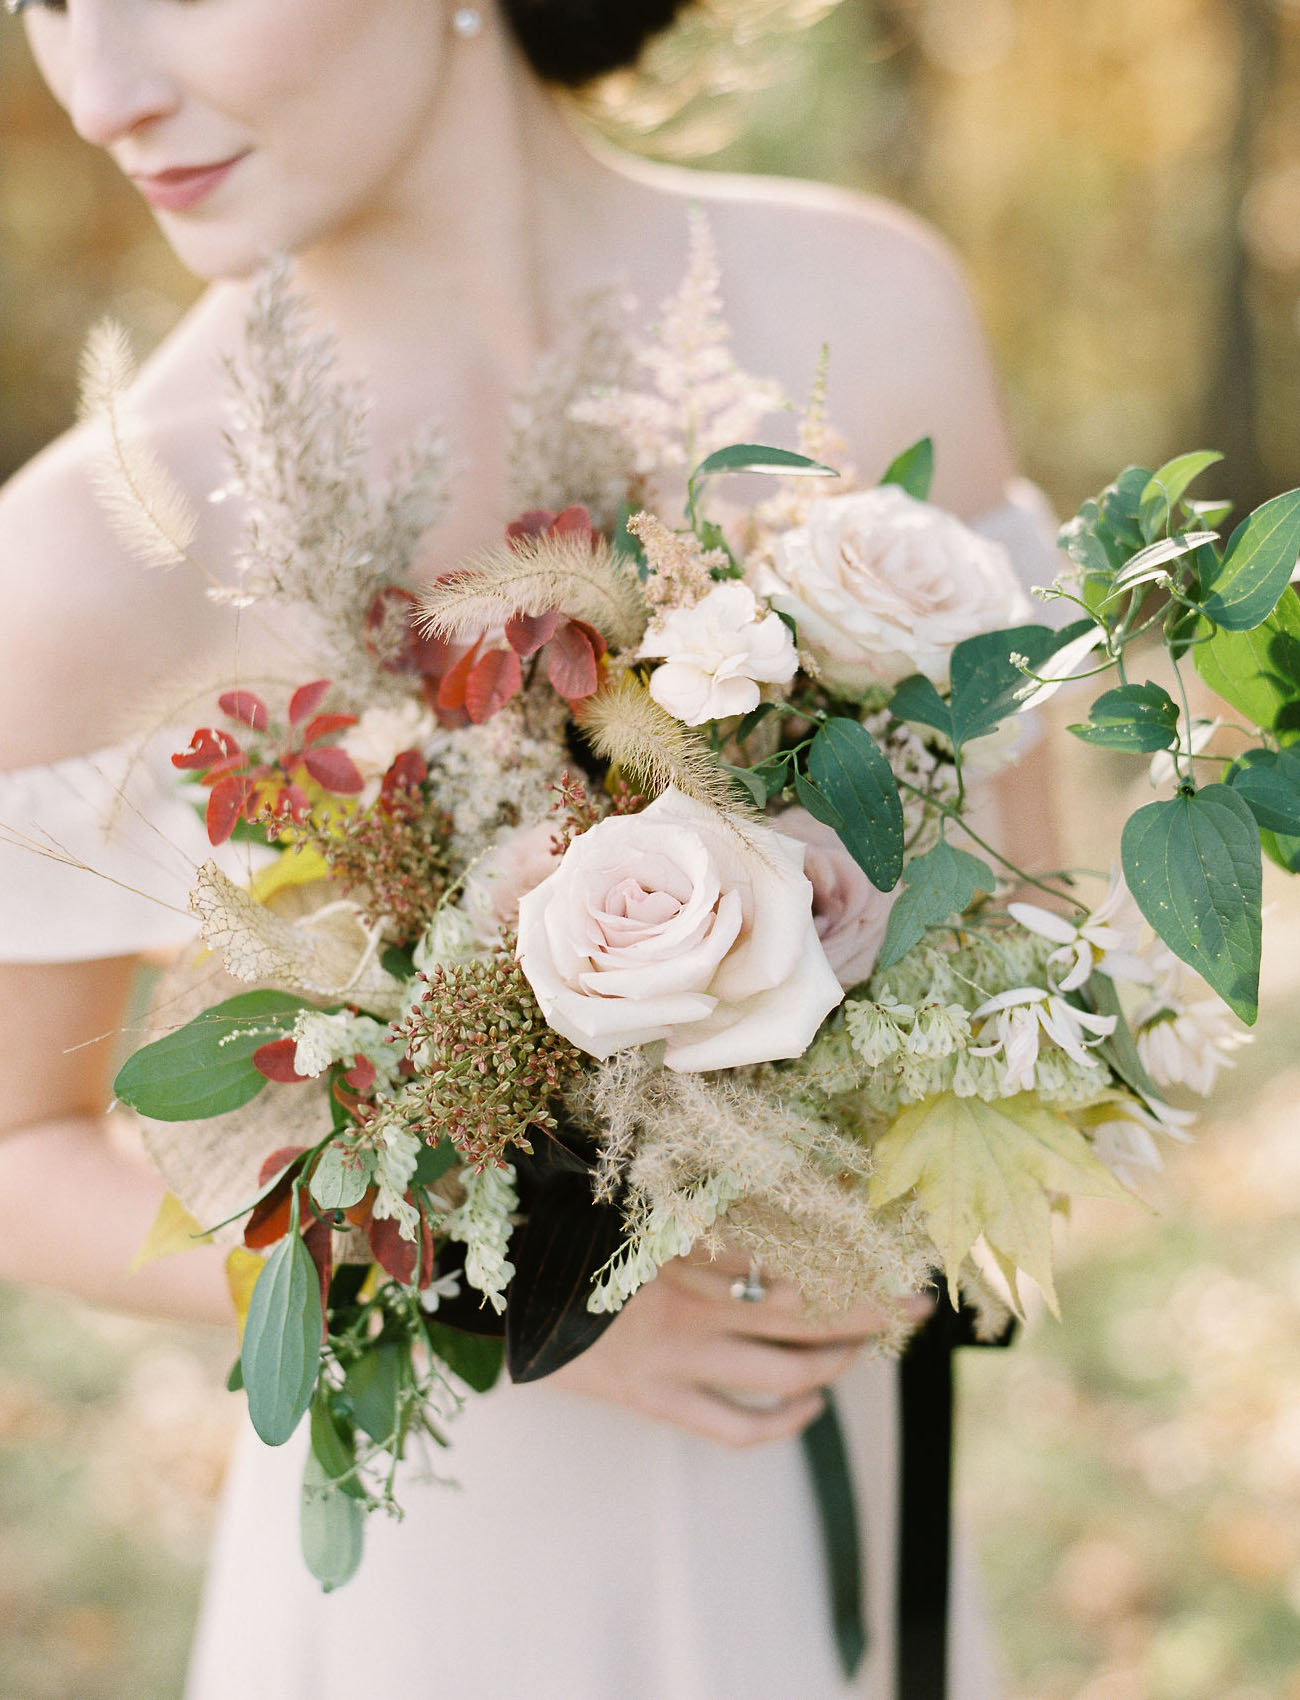 Her bouquet included both creamy hues and burgundy ones plus greenery and dried herbs